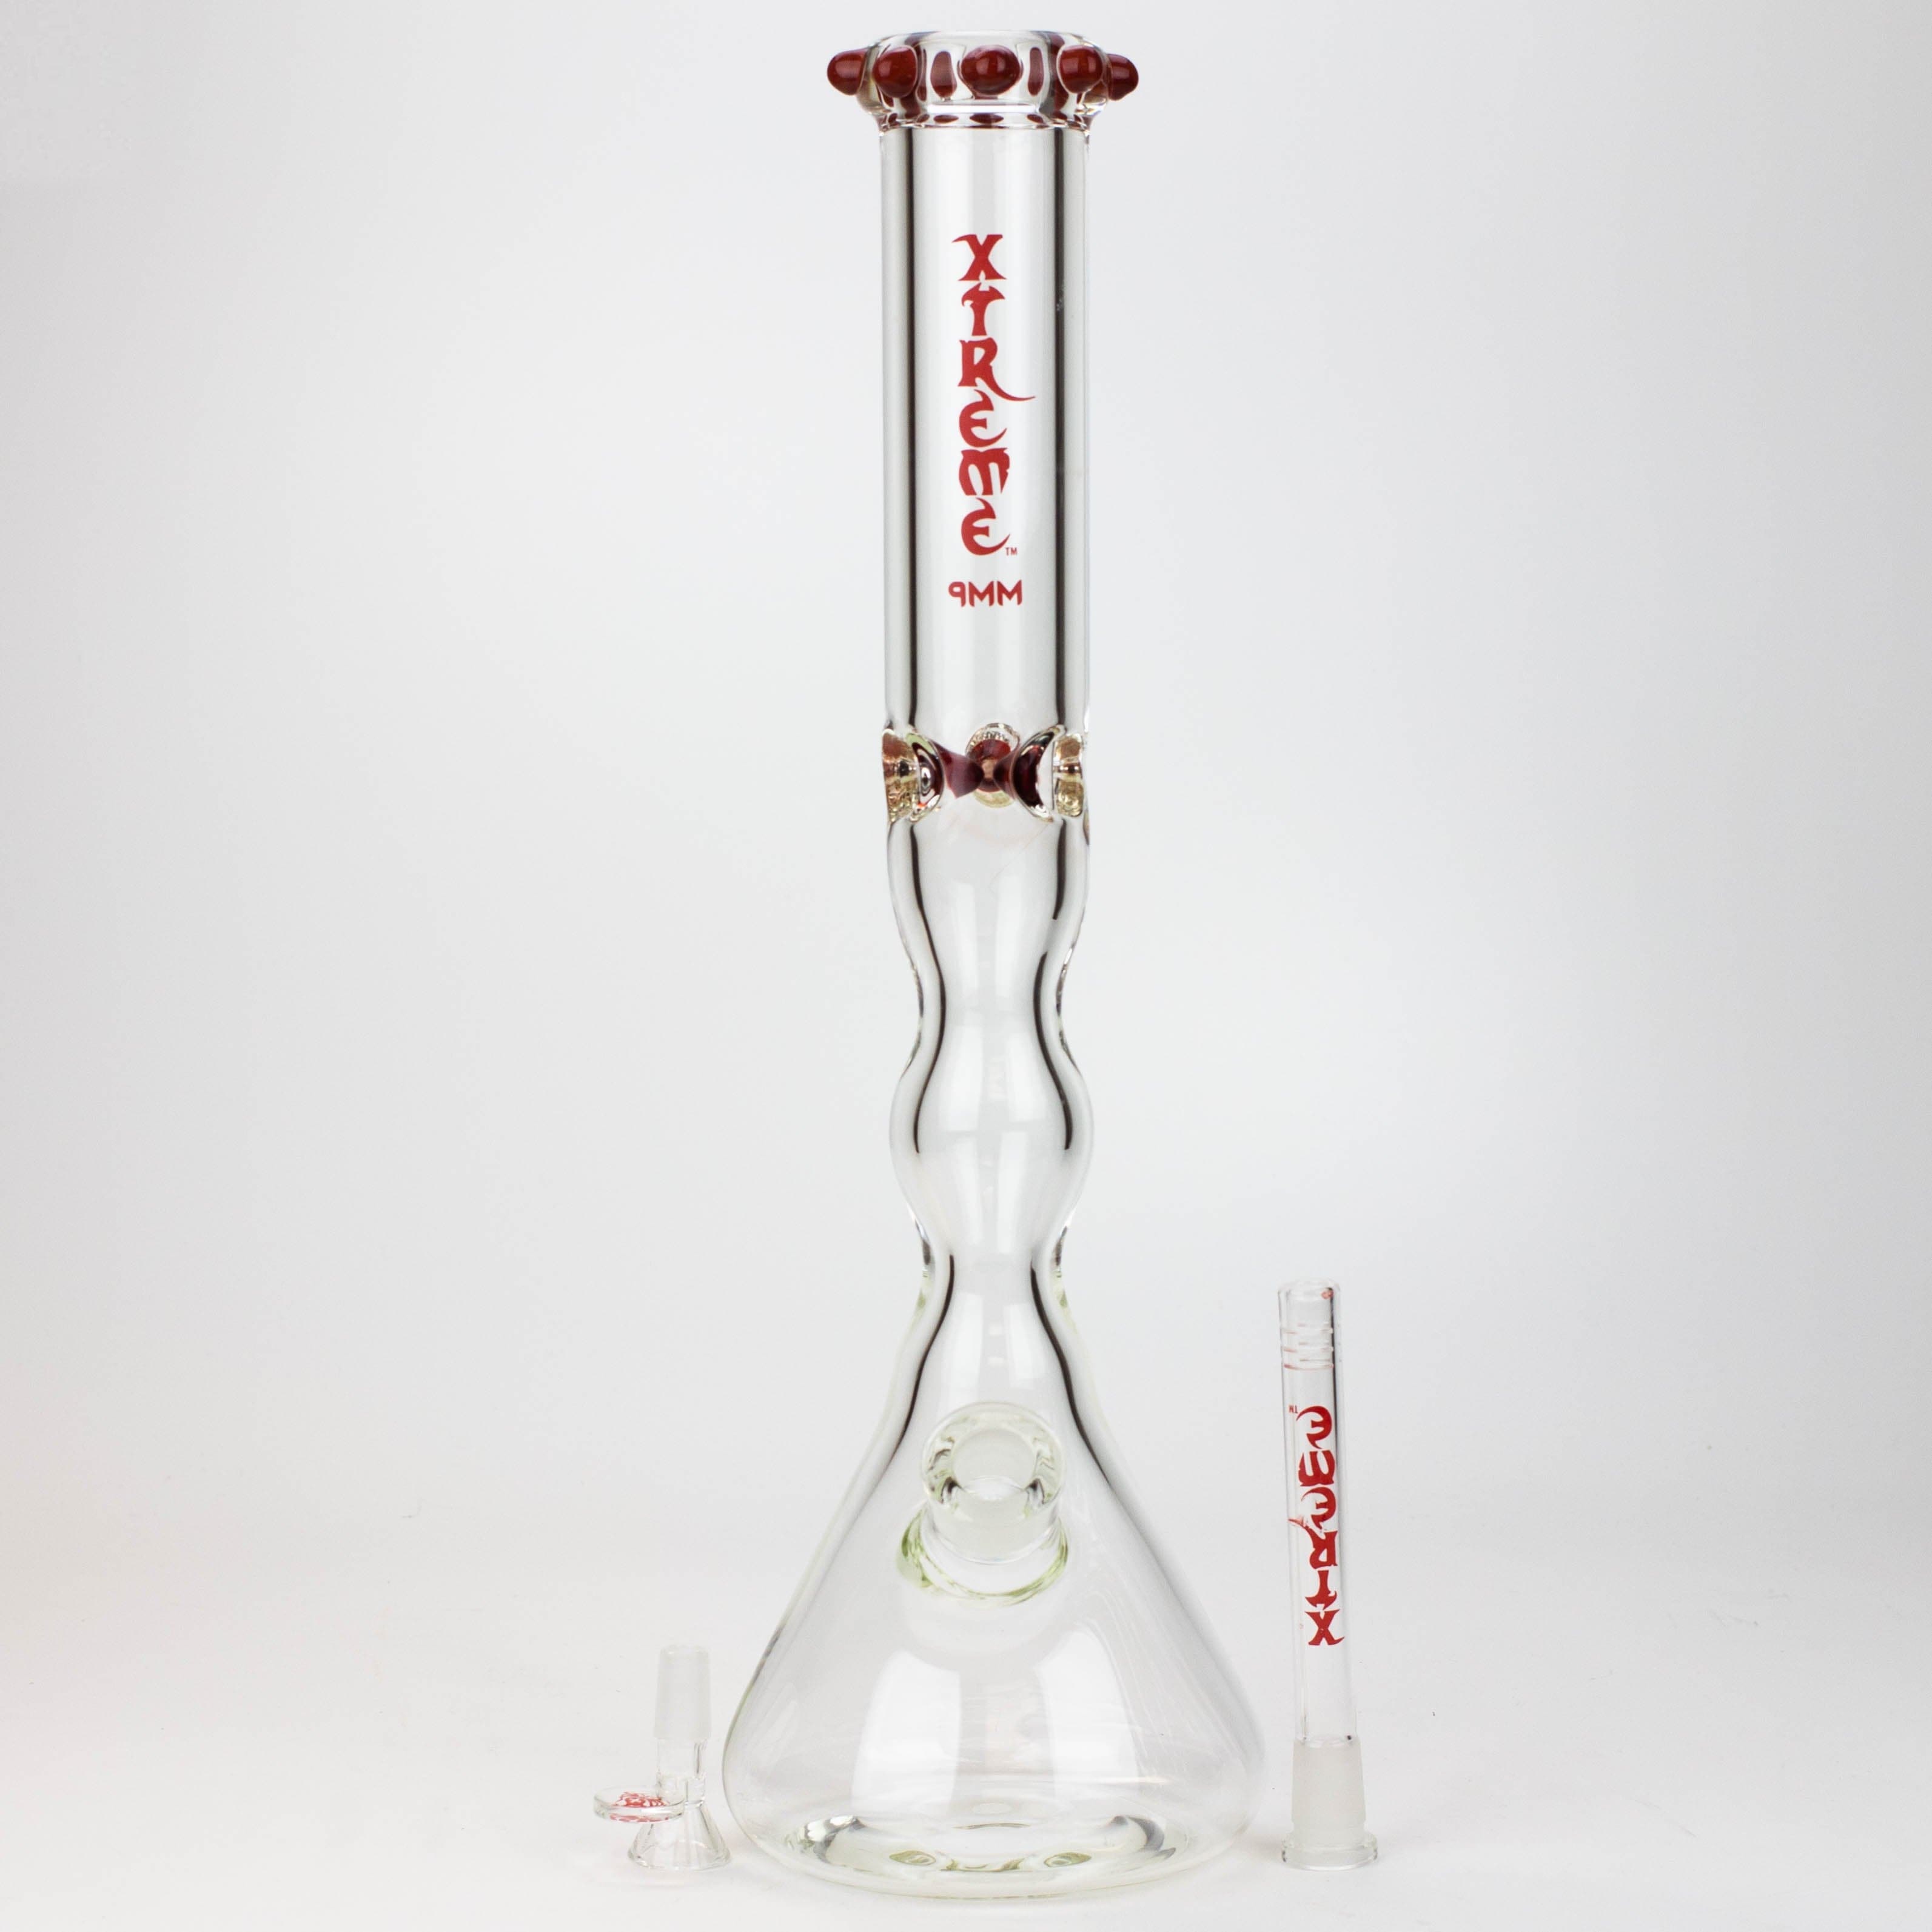 Xtreme curved tube glass water pipes_2